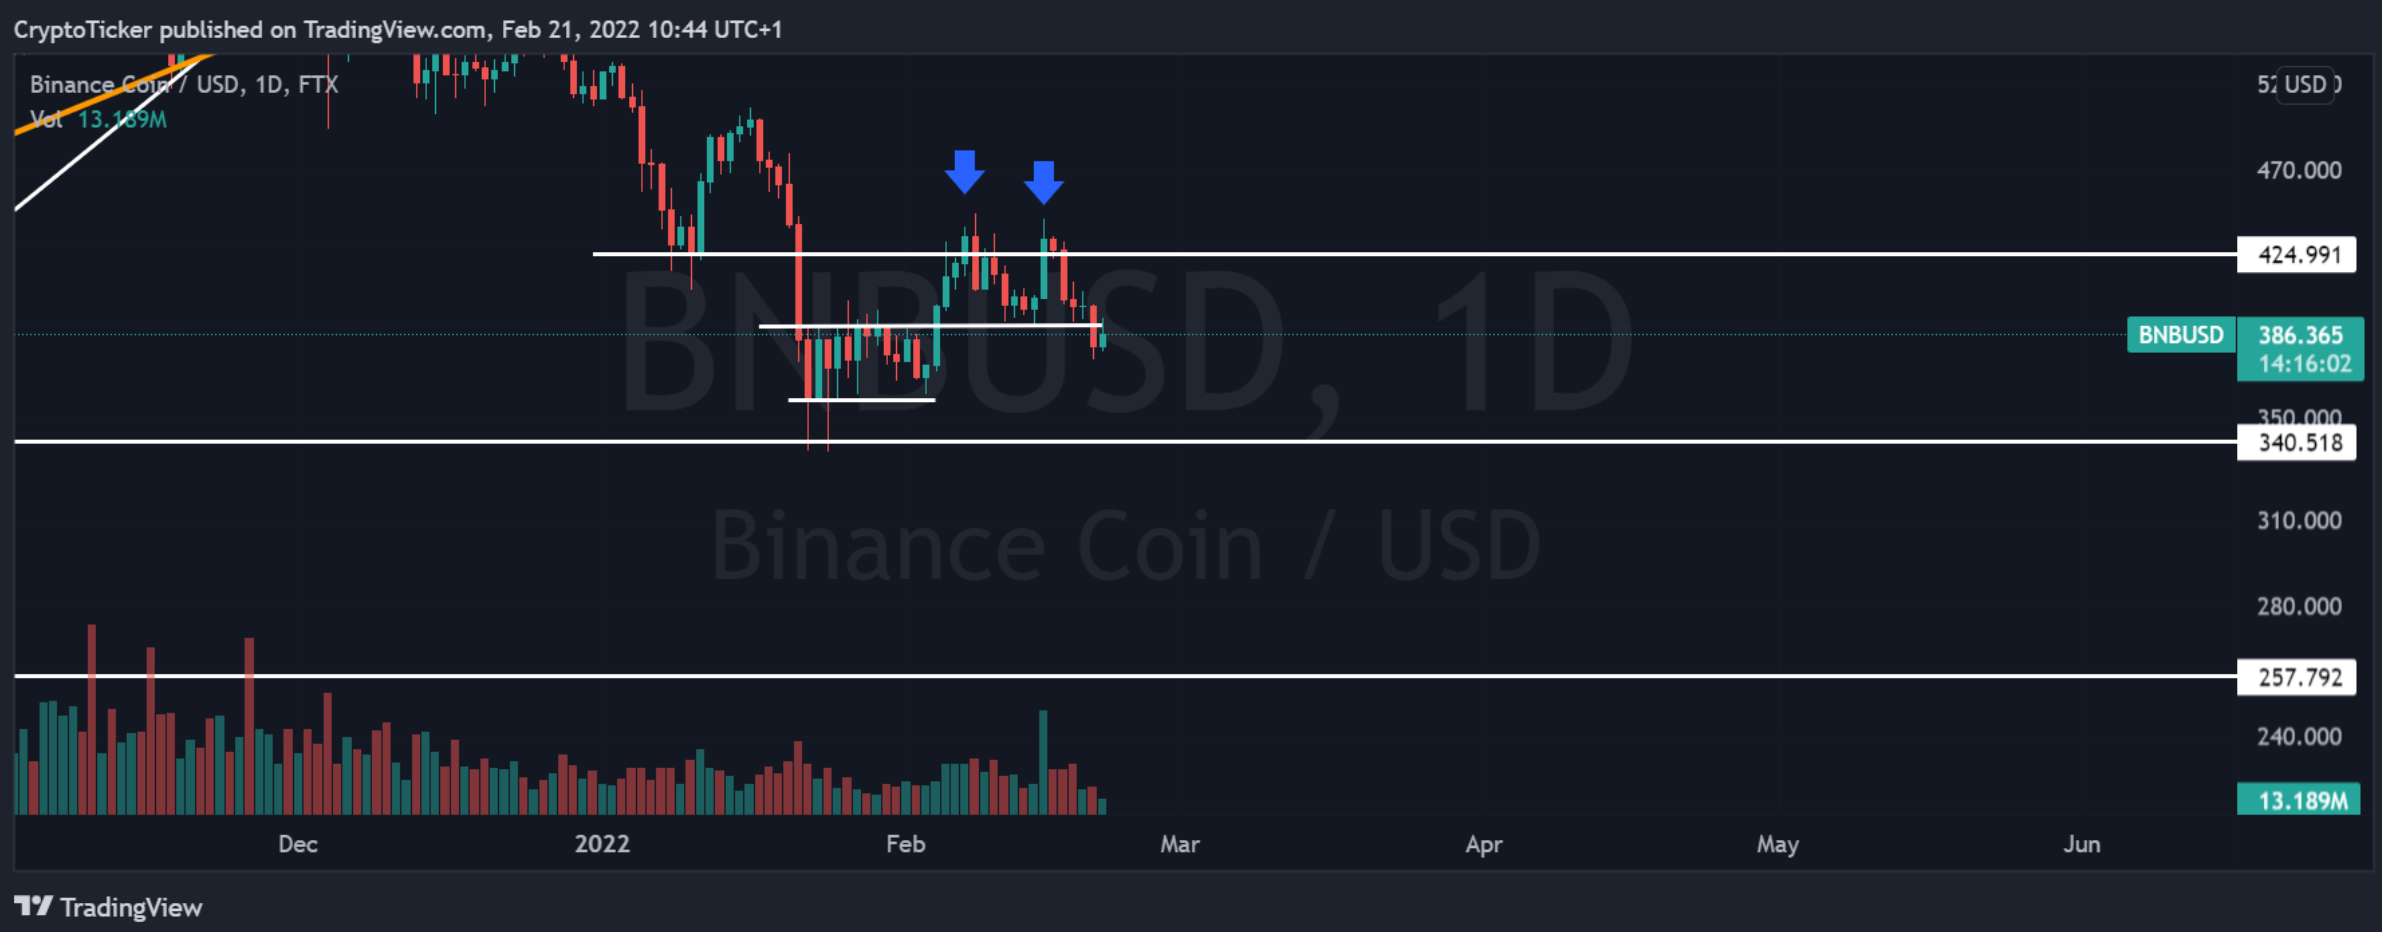 BNB/USD 1-day chart showing the resistance of BNB price